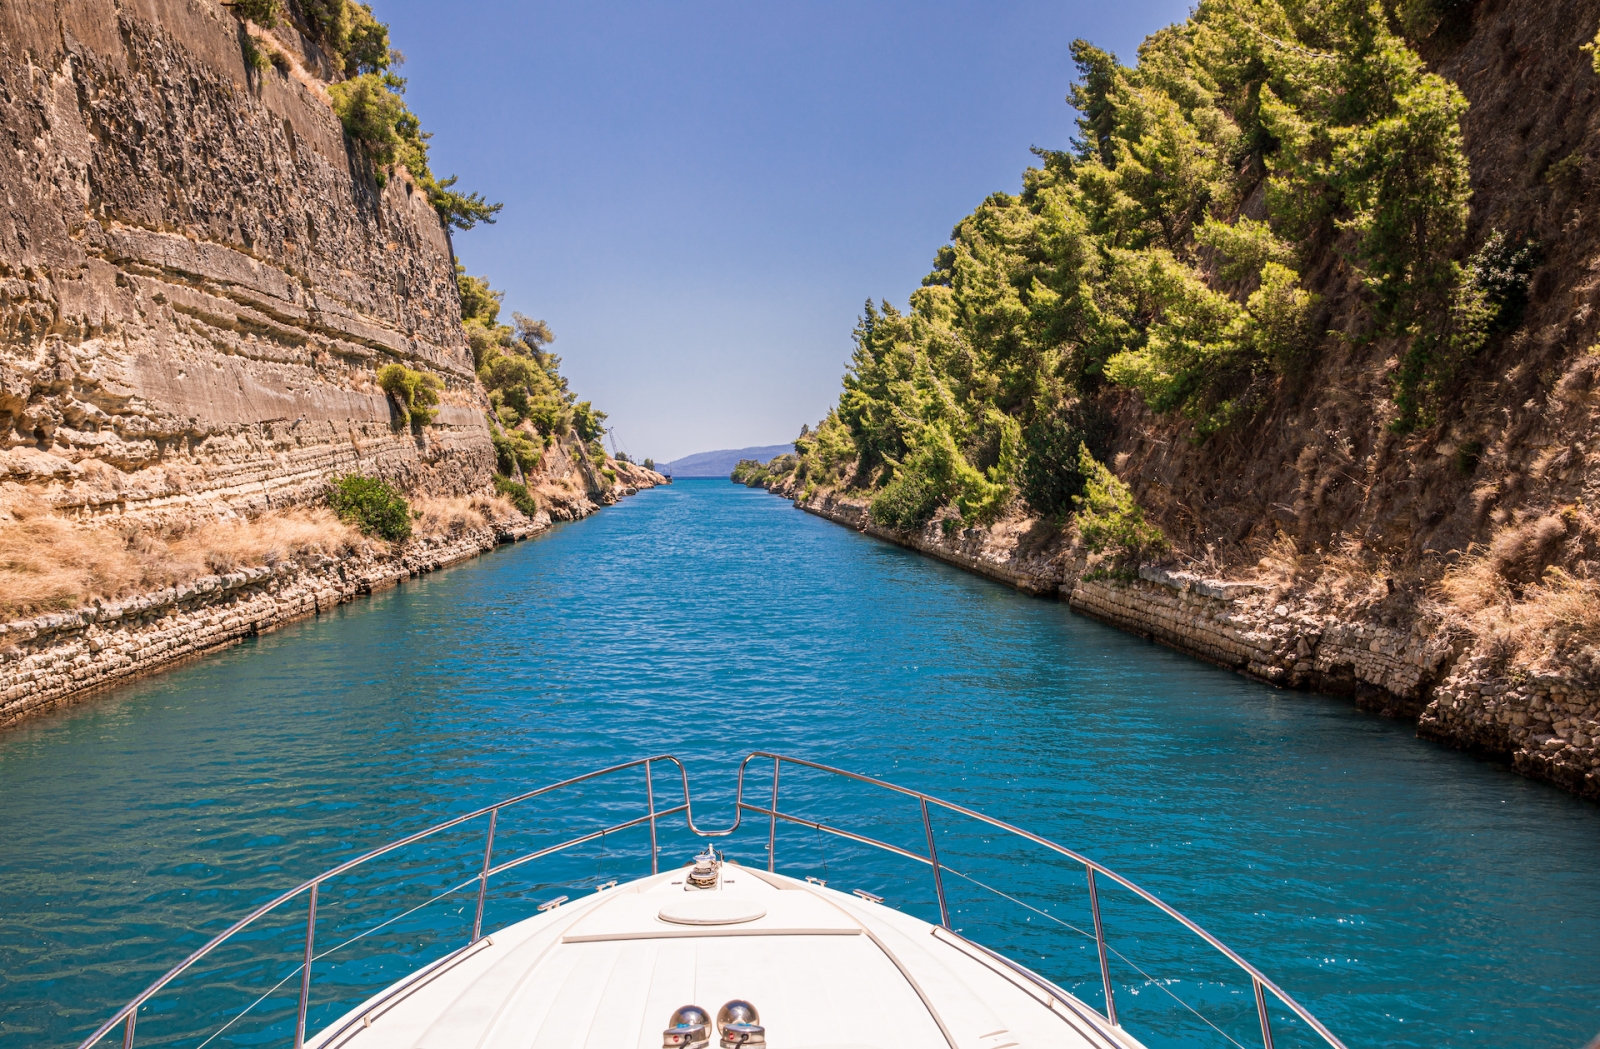 Passing through the Corinth Canal by yacht, Greece. The Corinth Canal connects the Gulf of Corinth with the Saronic Gulf in the Aegean Sea.